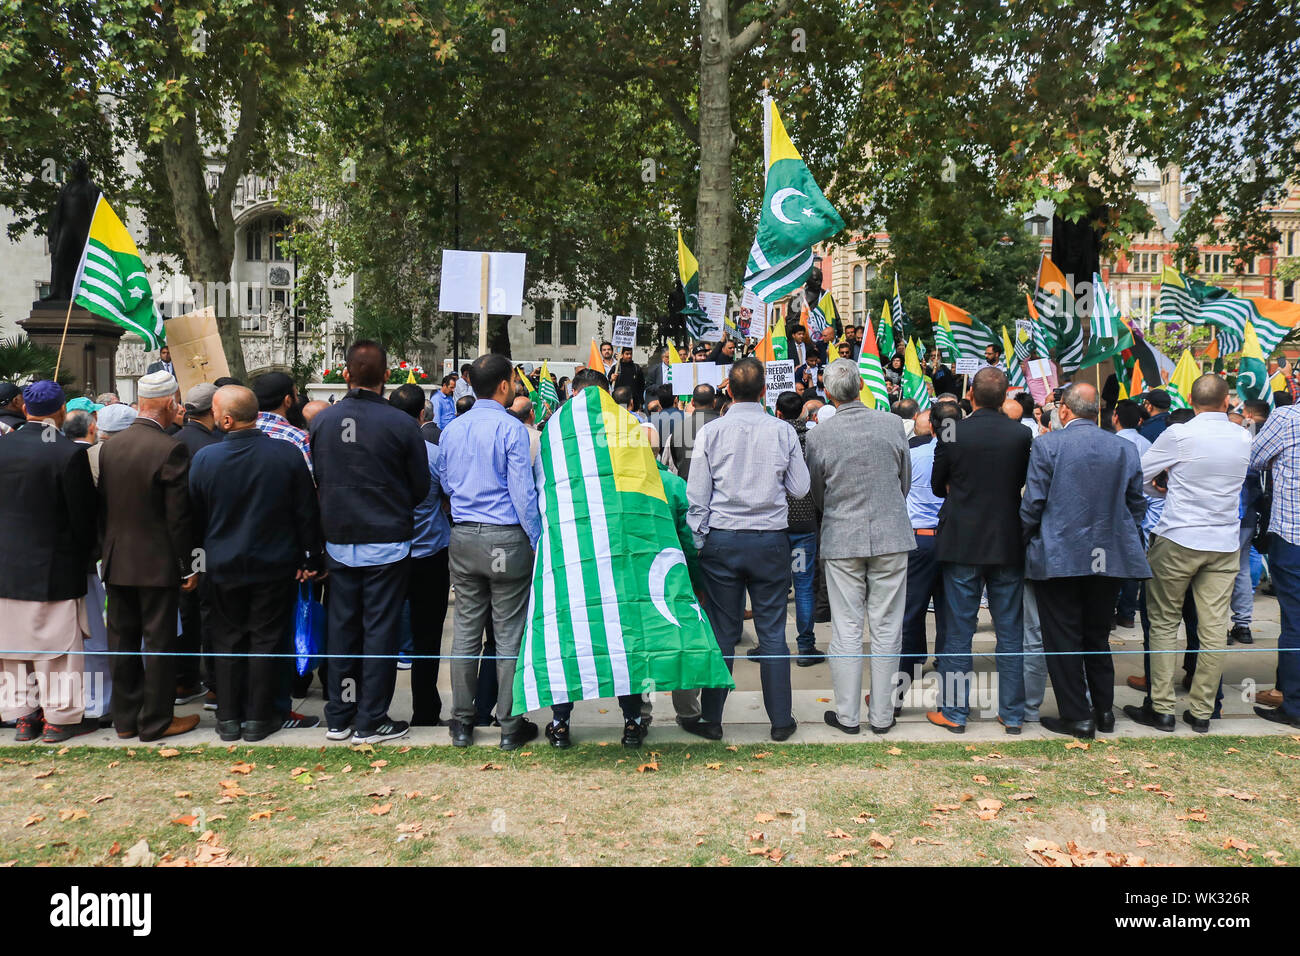 London, UK. 03rd Sep, 2019. A Protester wearing a Kashmiri flags stands with other protesters as they gather in Parliament Square around the statue of Gandhi in solidarity with the people of Kashmir after Indian Prime Minister Narendra Modi delivered an Independence Day speech to remove the special rights of Kashmir as an autonomous region. Credit: SOPA Images Limited/Alamy Live News Stock Photo